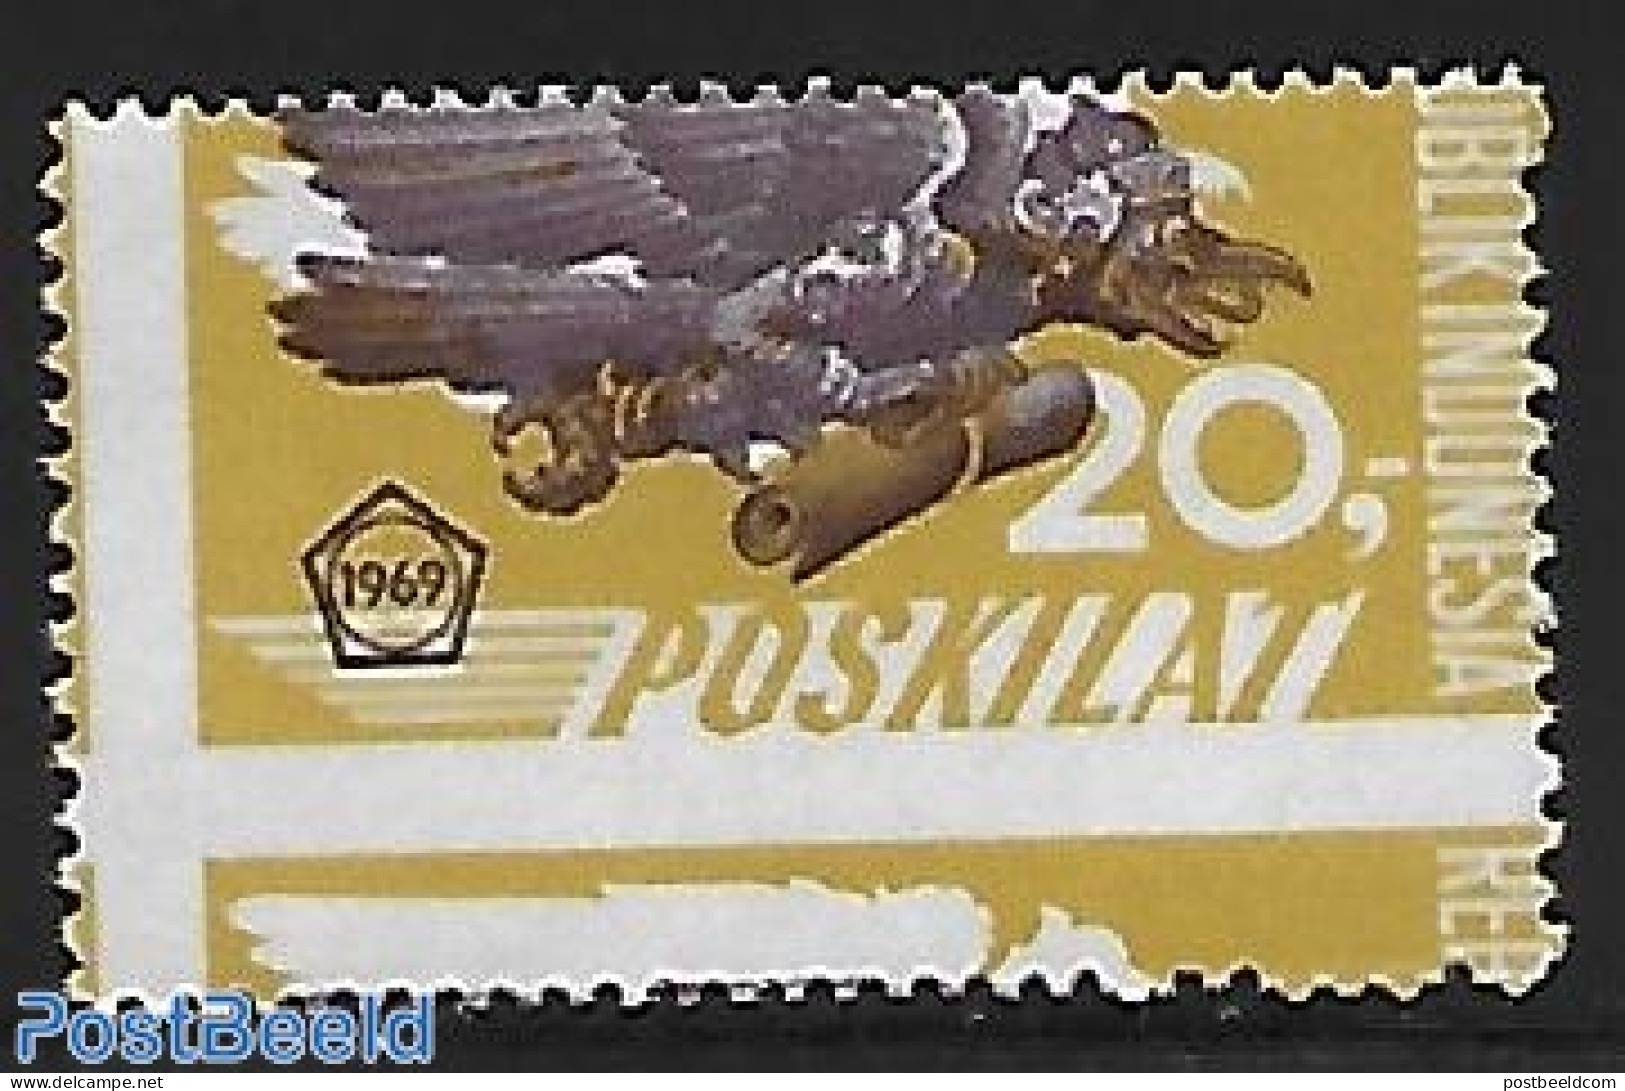 Indonesia 1969 Misprint, Mint NH, Various - Mail Boxes - Errors, Misprints, Plate Flaws - Poste